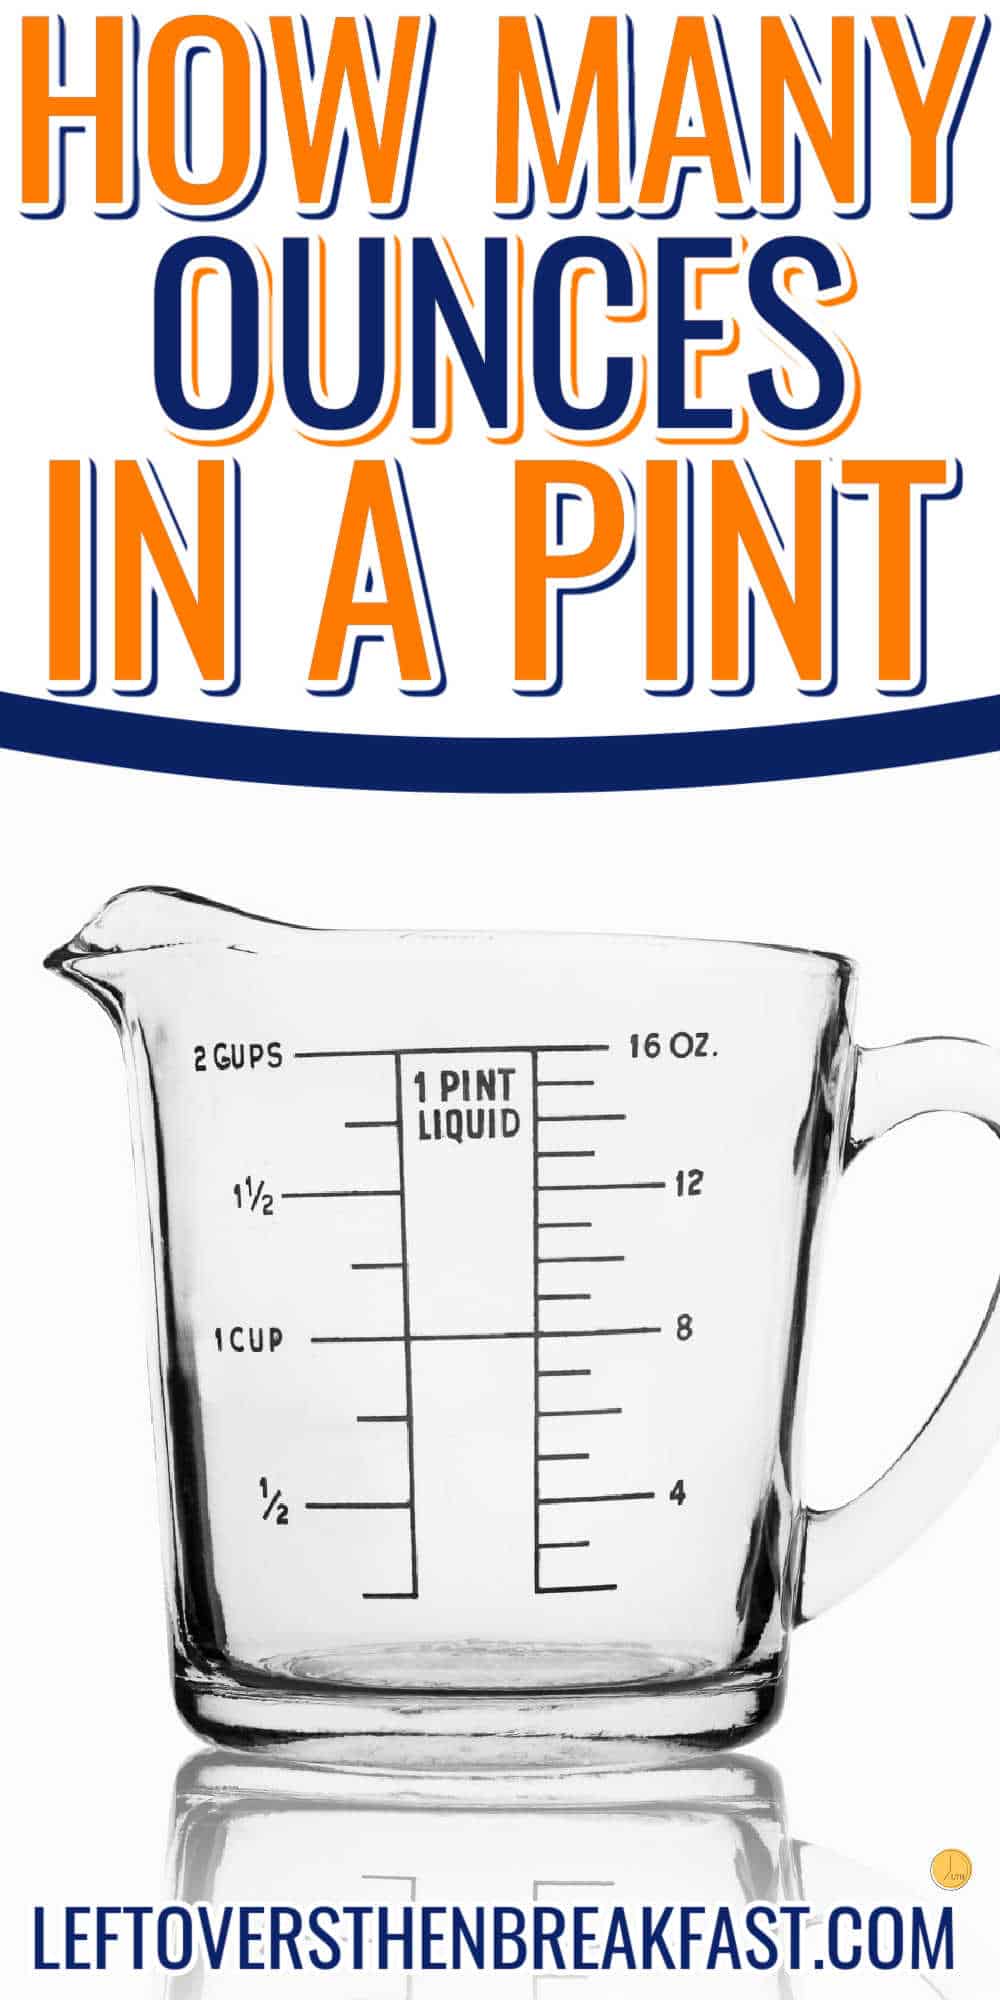 glass measuring cup with text "how many ounces in a pint"